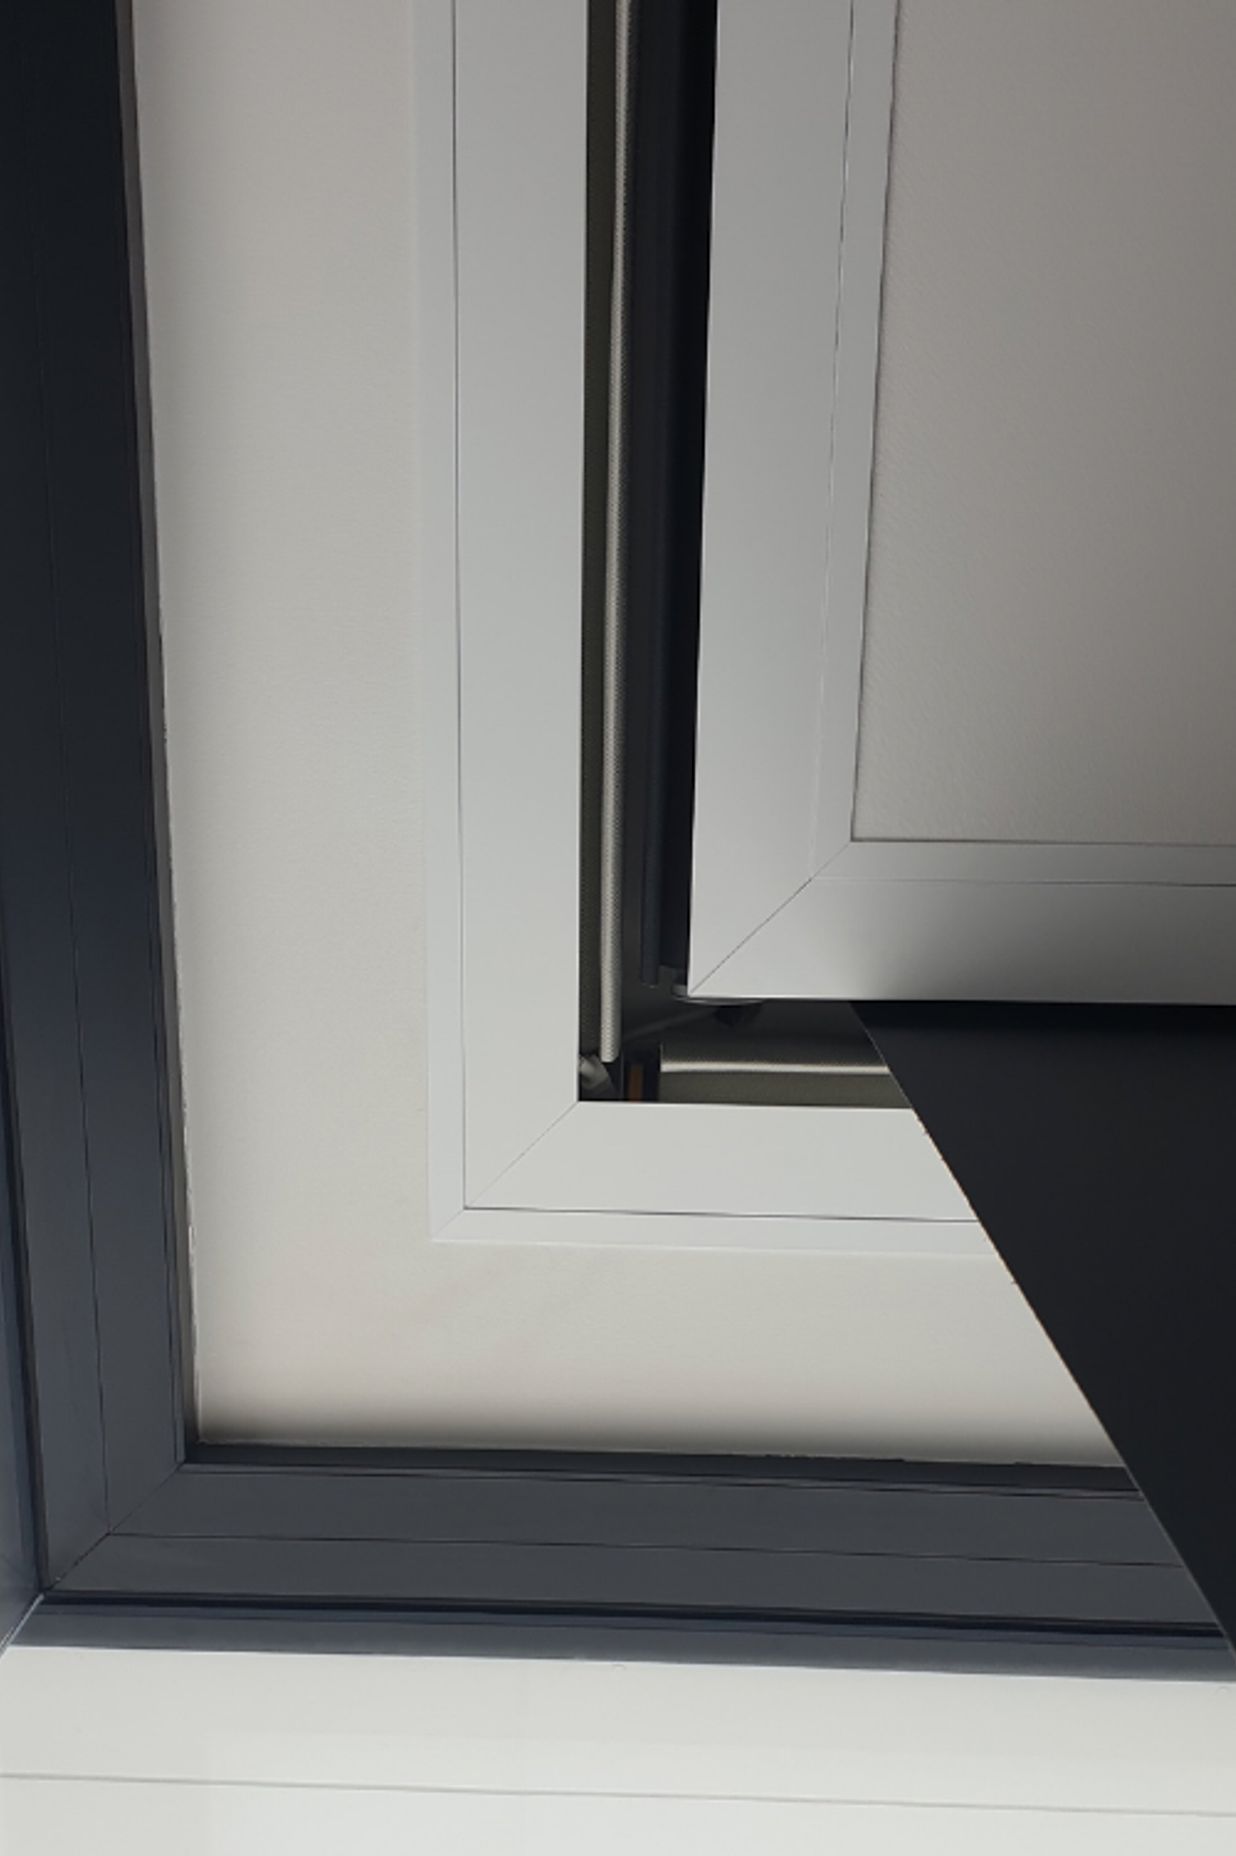 Mitred-corner face plates allow for two FlushBoxes to sit perpendicular to each other for corner glazing applications.